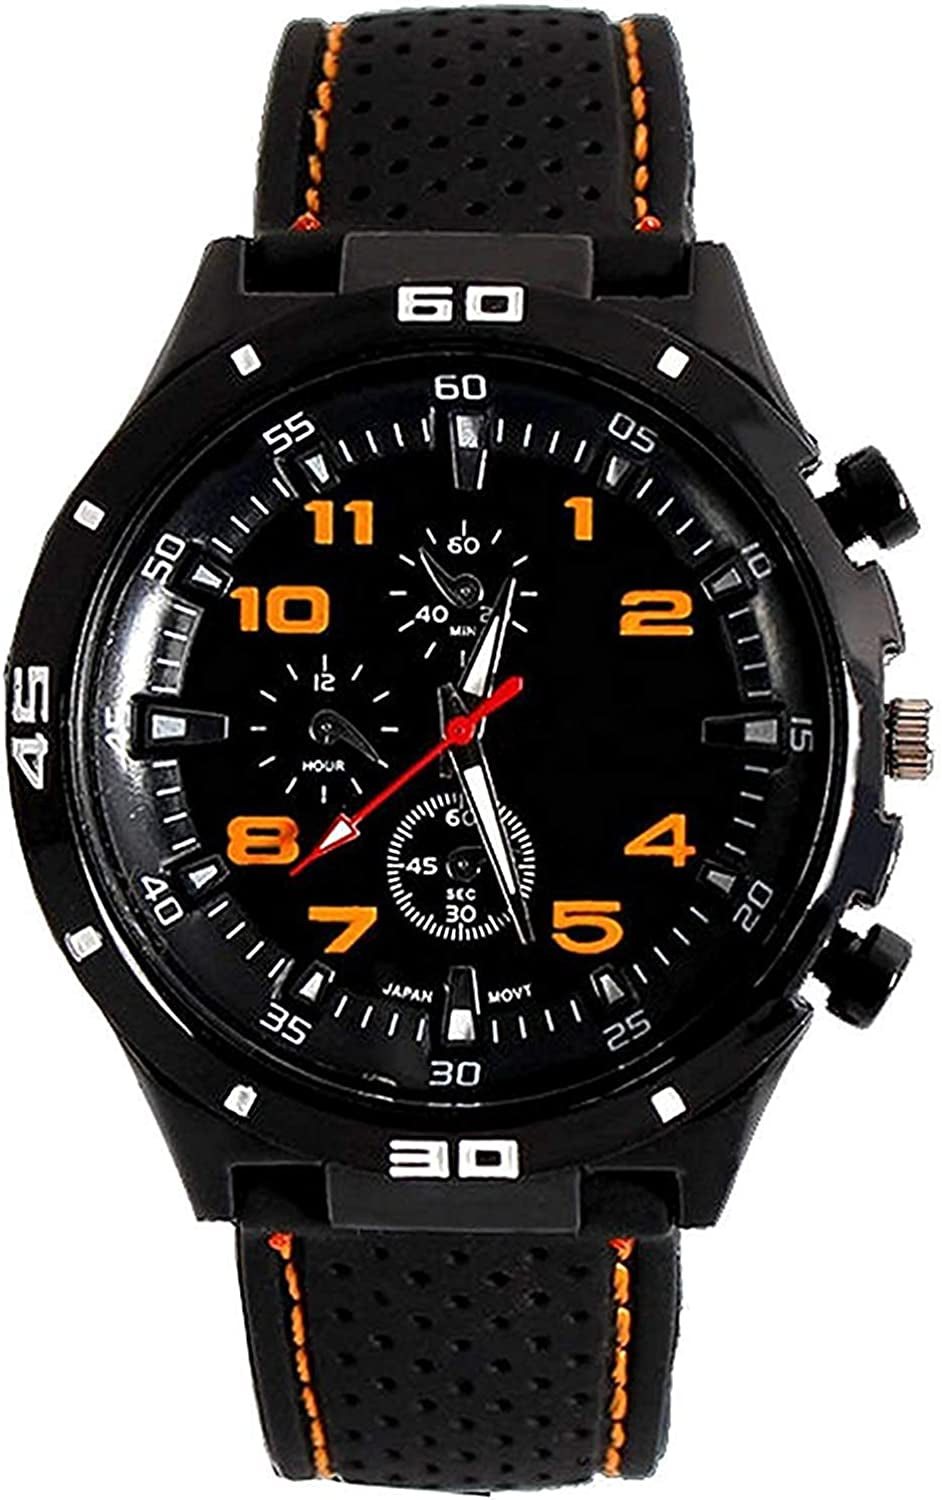  Men's GT Racer Sport Watch Military Pilot Aviator Army Style Black Silicone Mens Watch